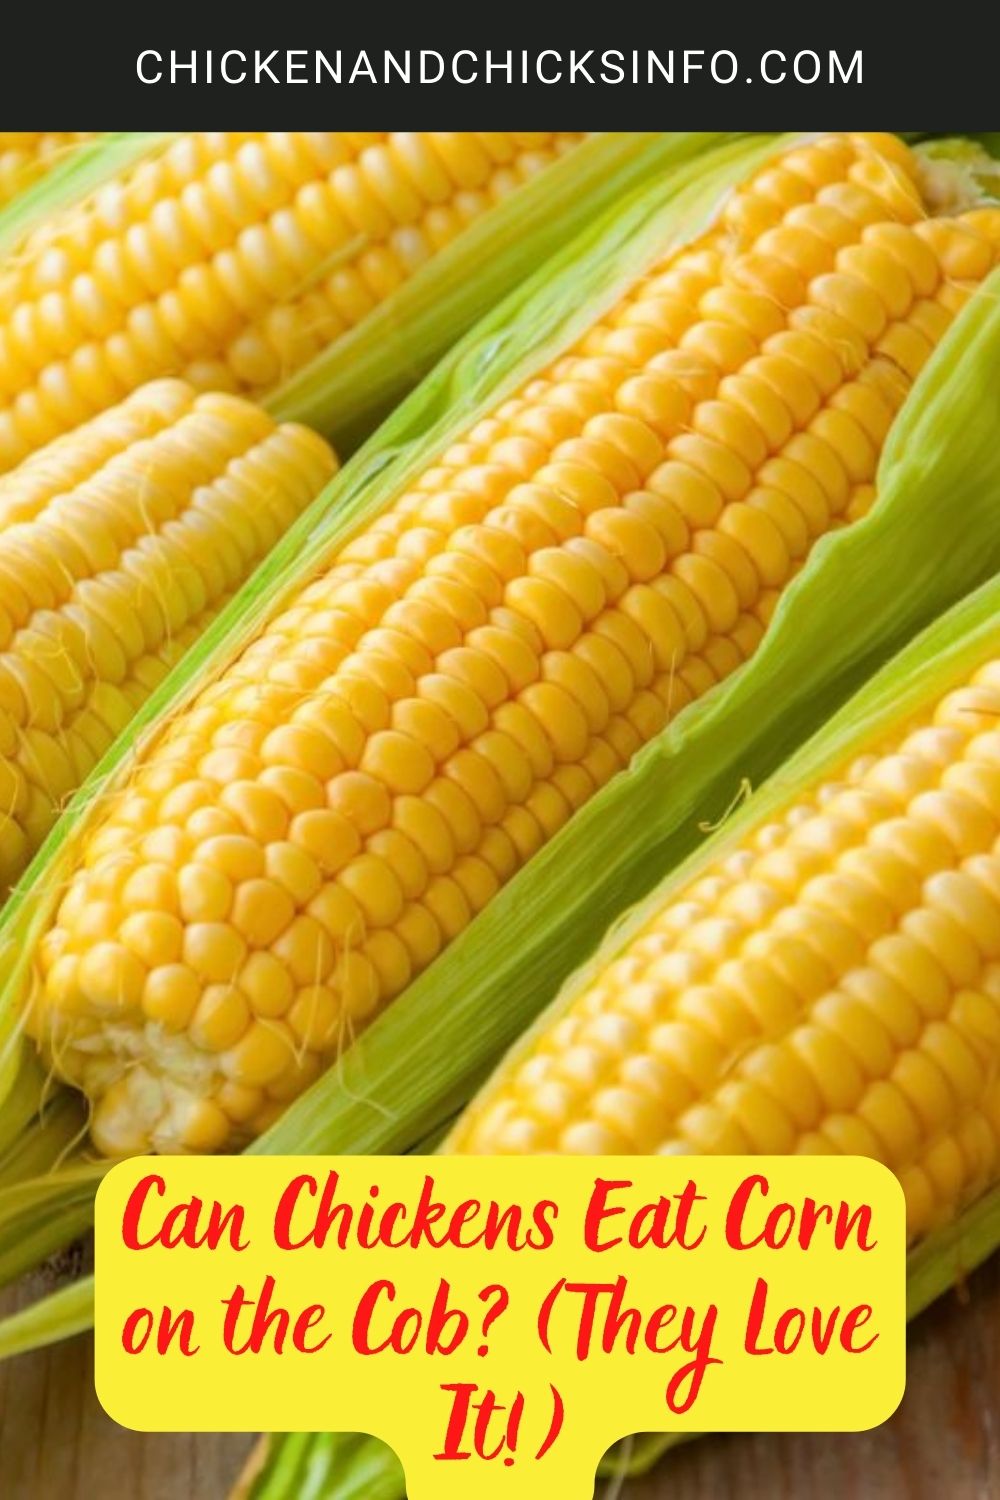 Can Chickens Eat Corn on the Cob? (They Love It!) poster.
